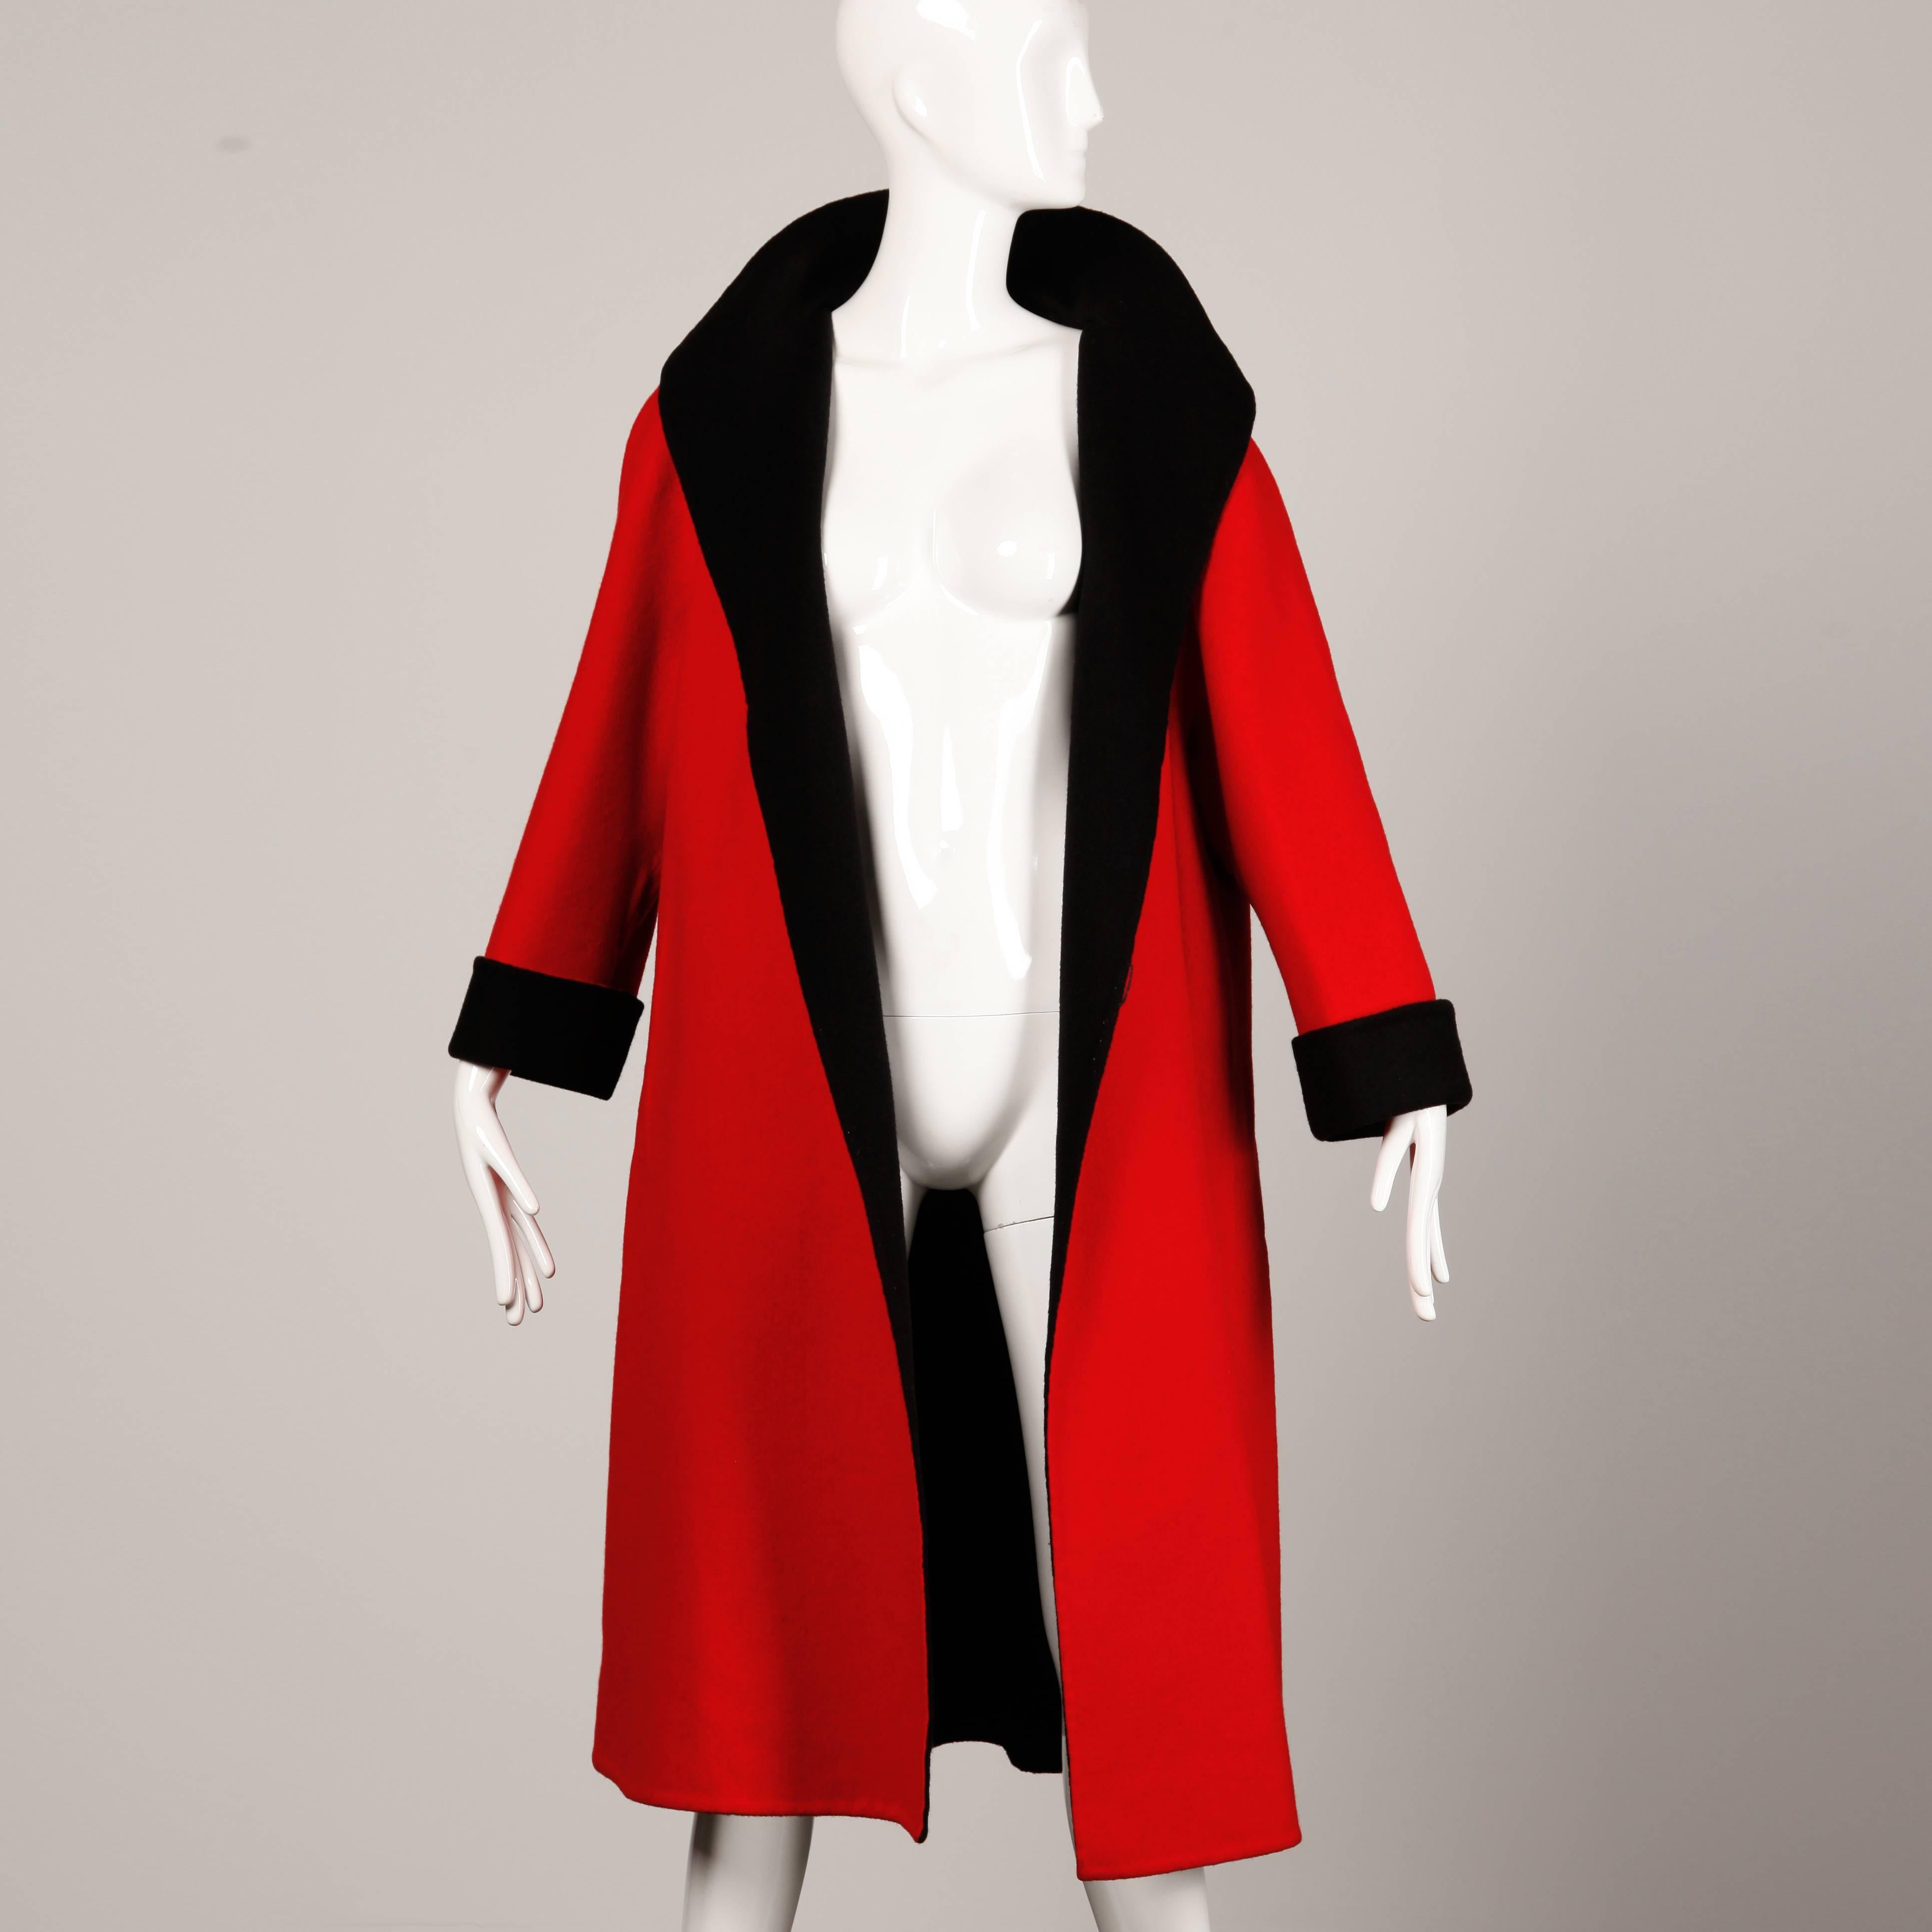 Gorgeous vintage red and black wool swing coat by Pauline Trigere for Nan Duskin.

Detail: 

Unlined
Front Slit Pockets
Inside Tie Closure
Estimated Size: Free (S-L)
Color: Black/ Red
Fabric: Wool 
Label: Pauline Trigere/ Nan